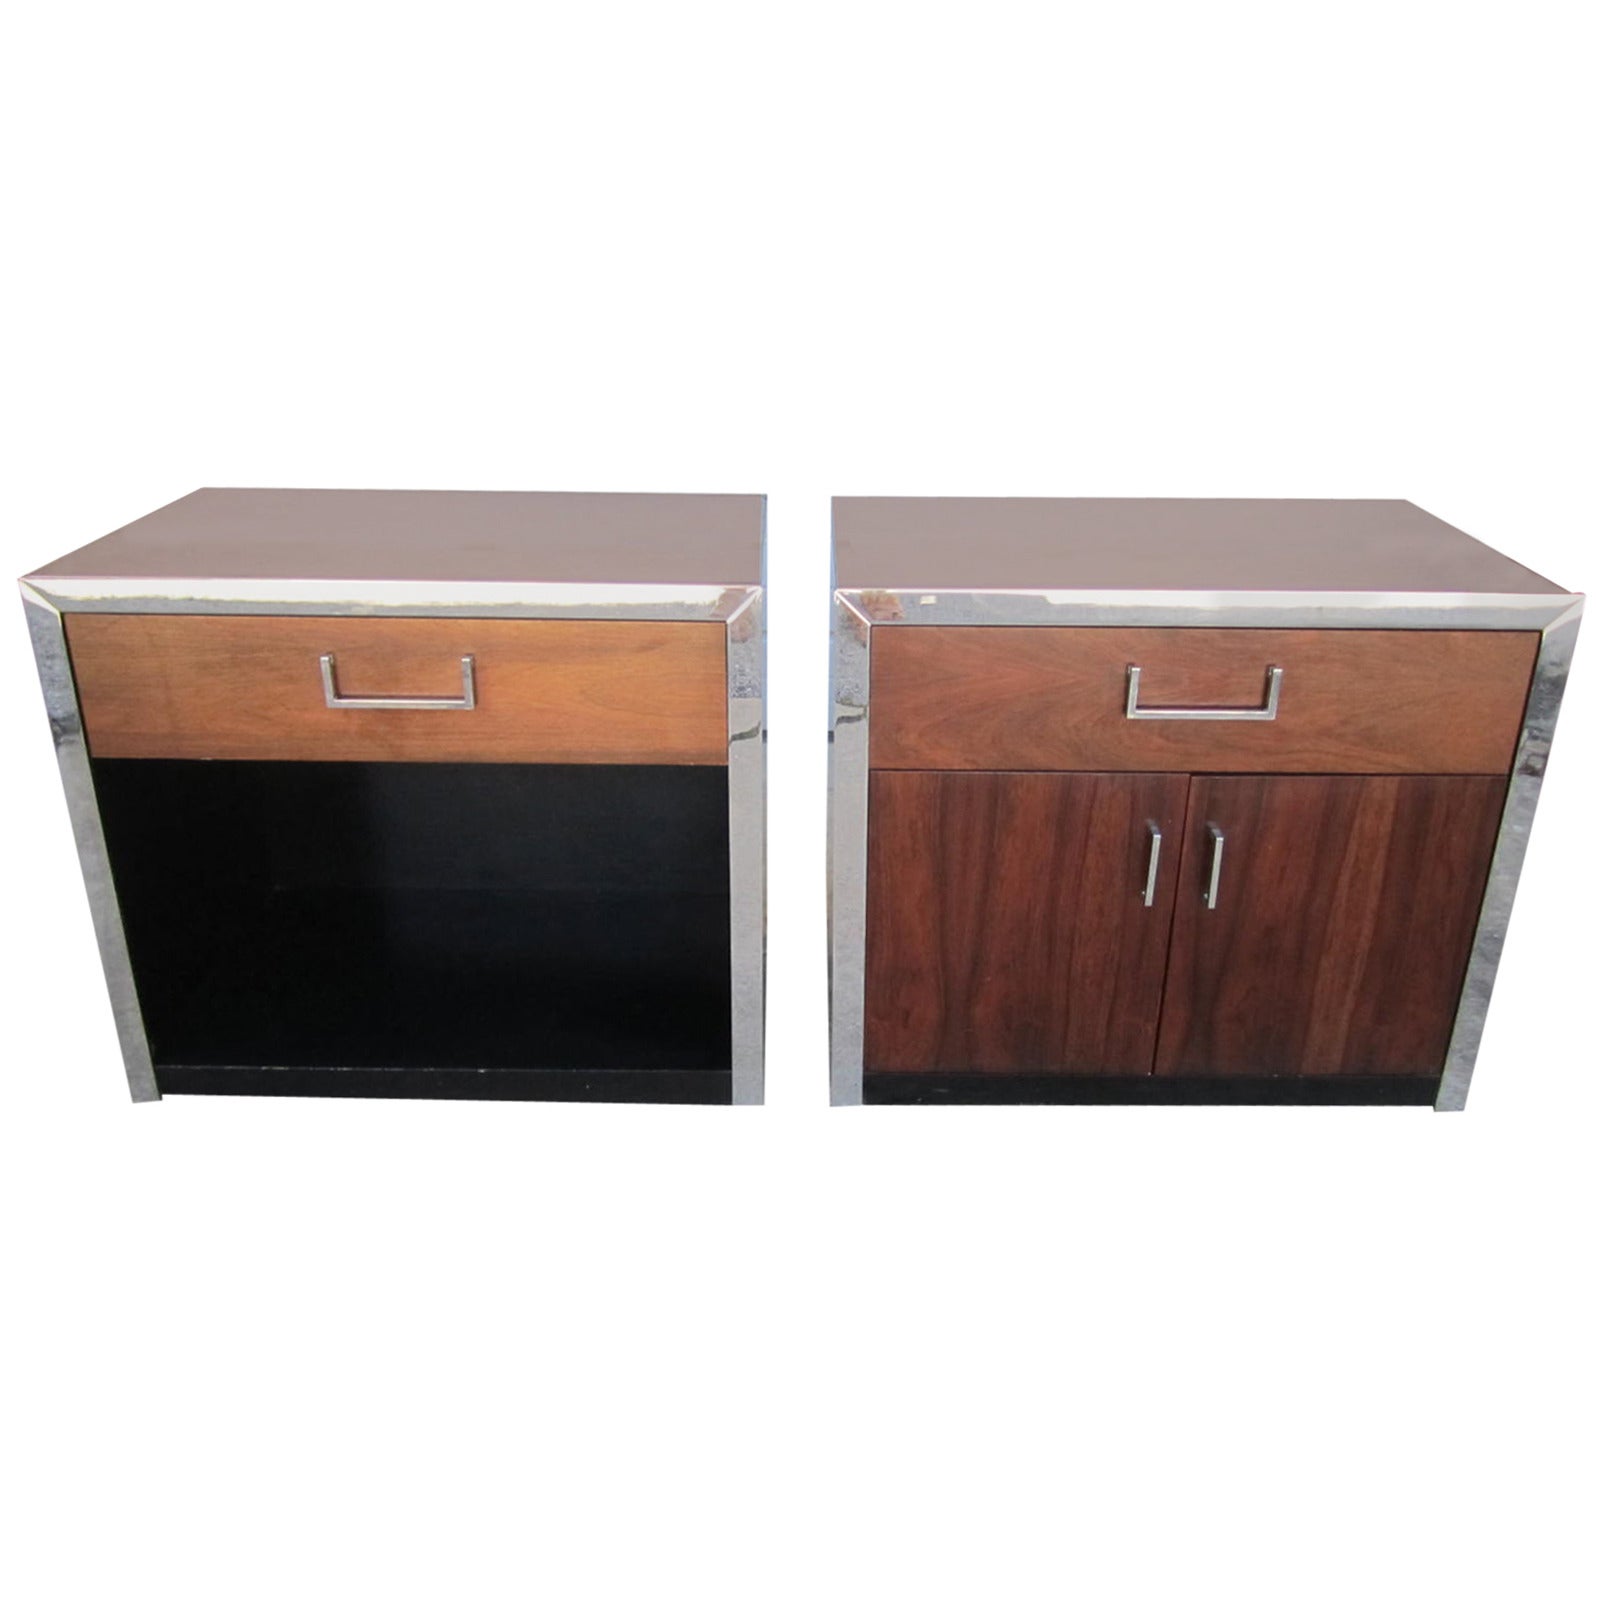 Two Milo Baughman Style Rosewood Chrome and Black Lacquer Night Stands